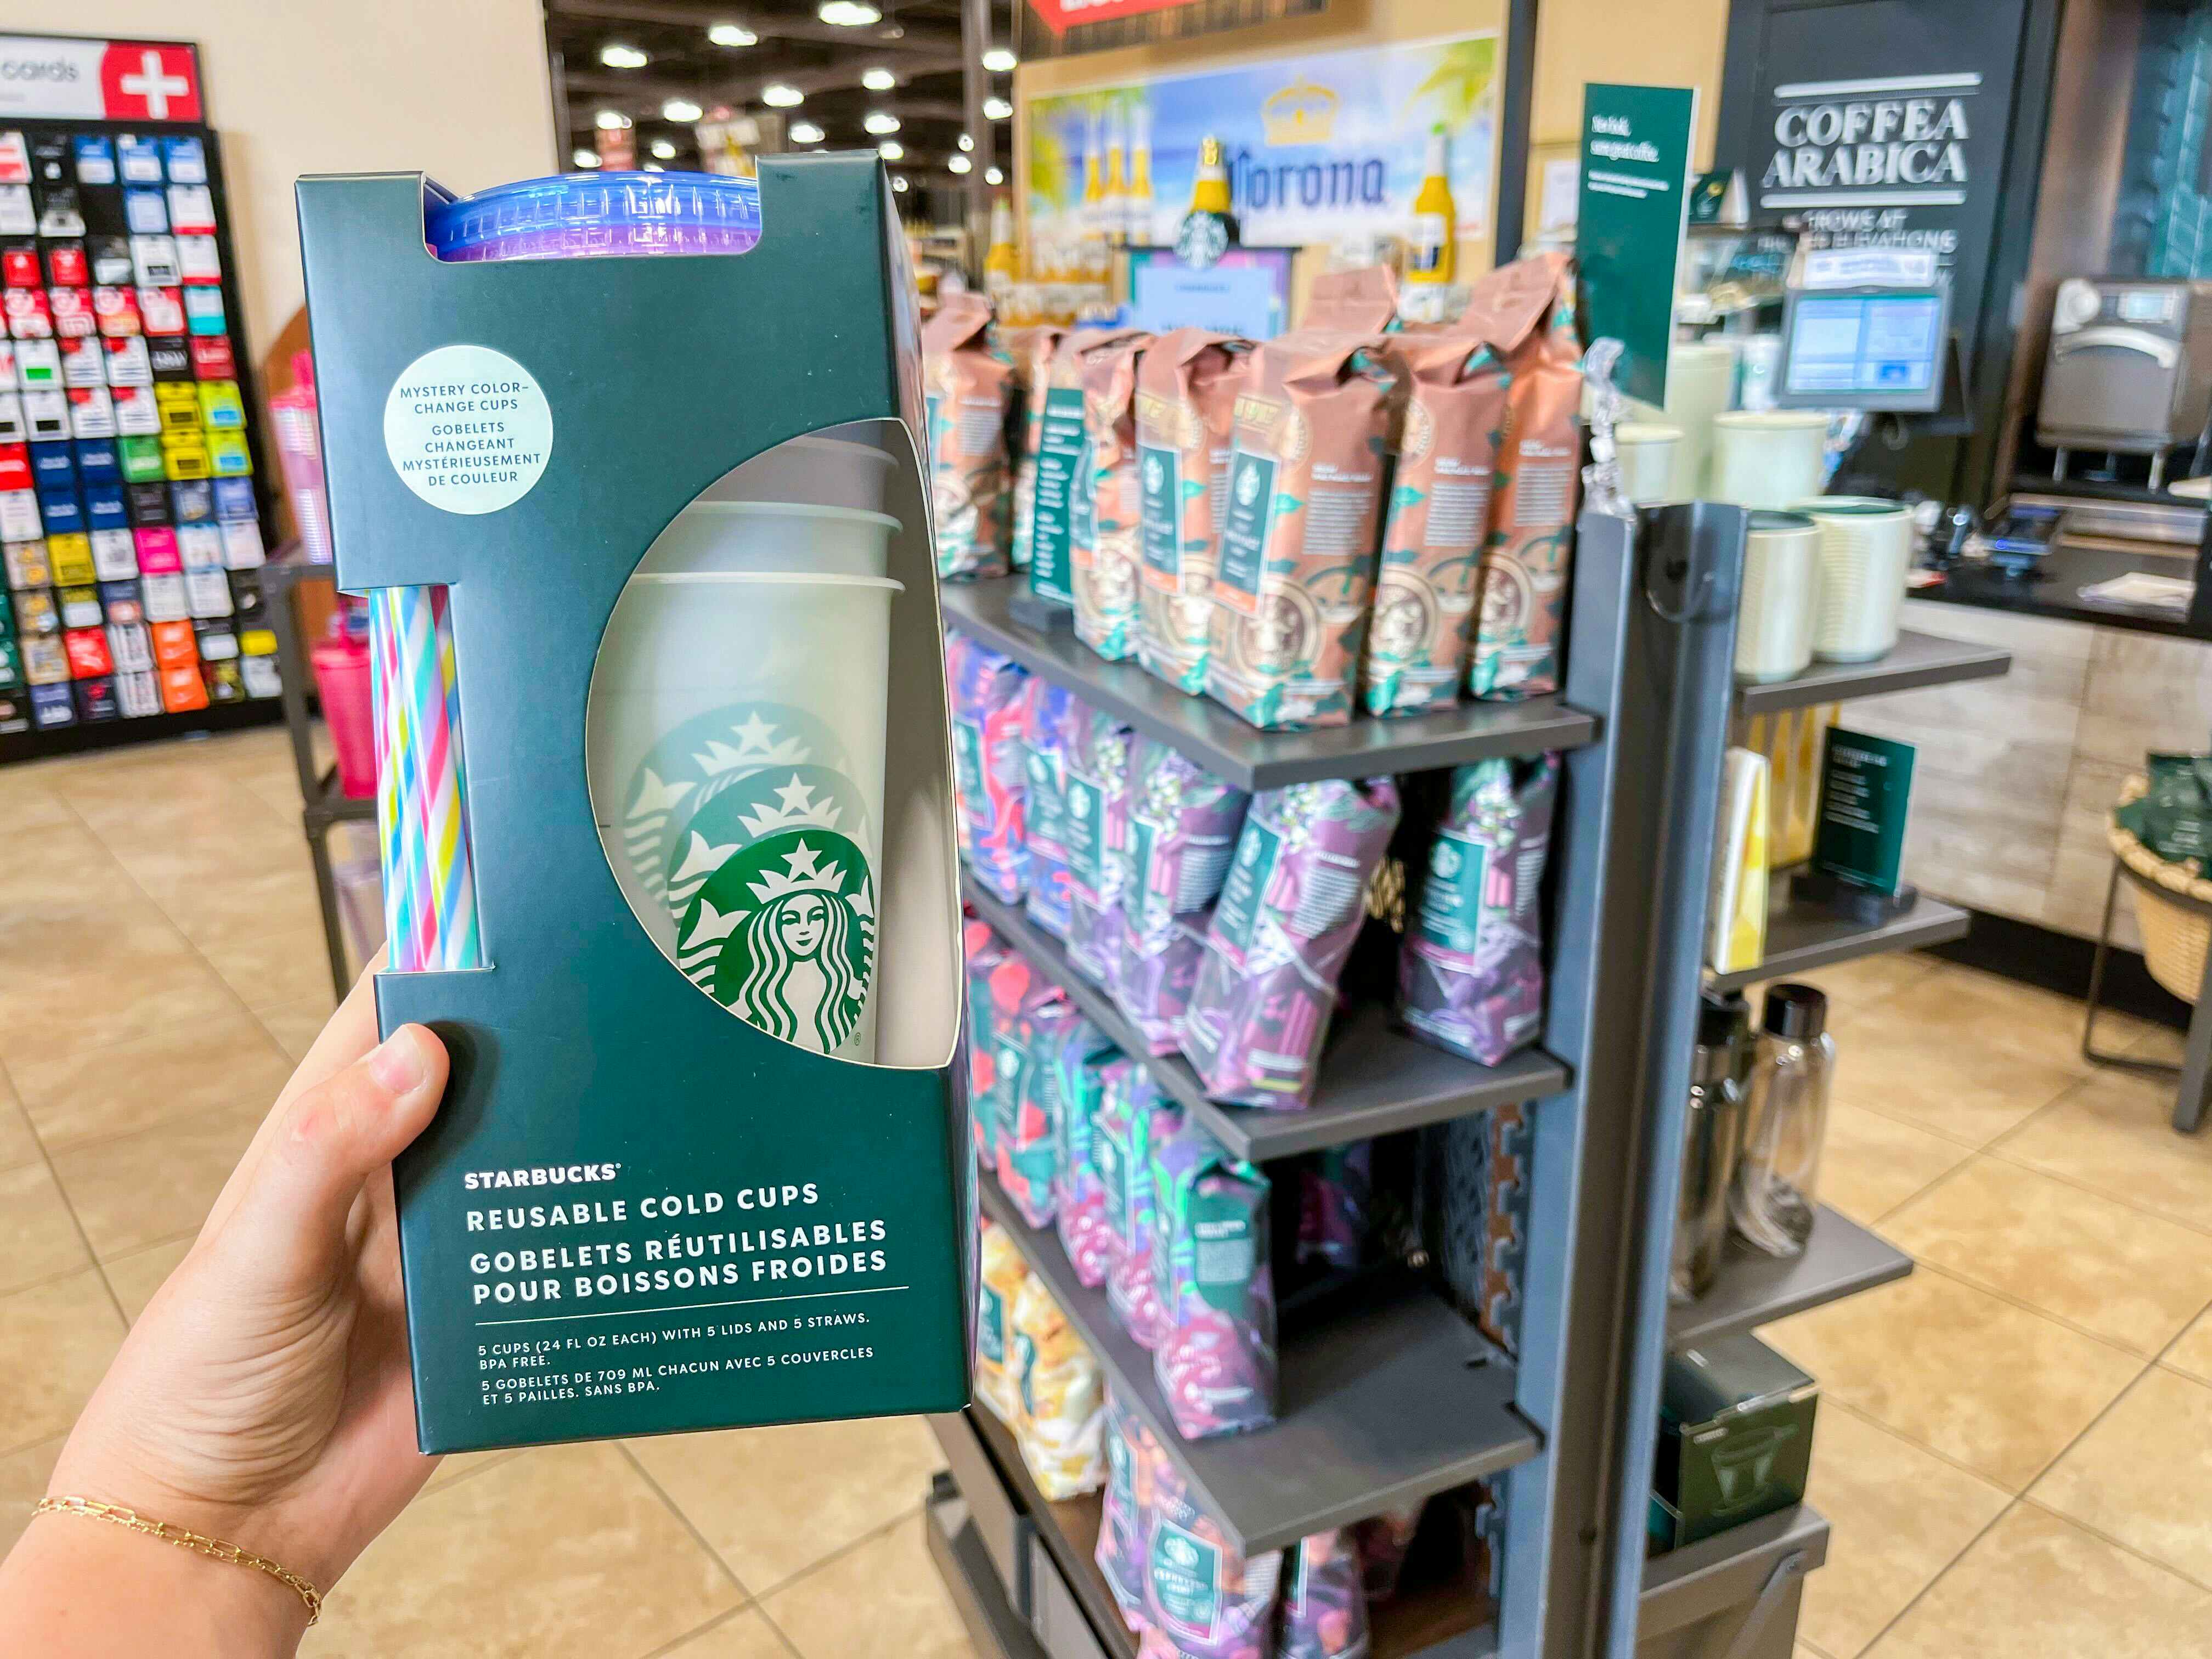 Starbucks Releases Mystery Color Changing Cups and I Want Them All